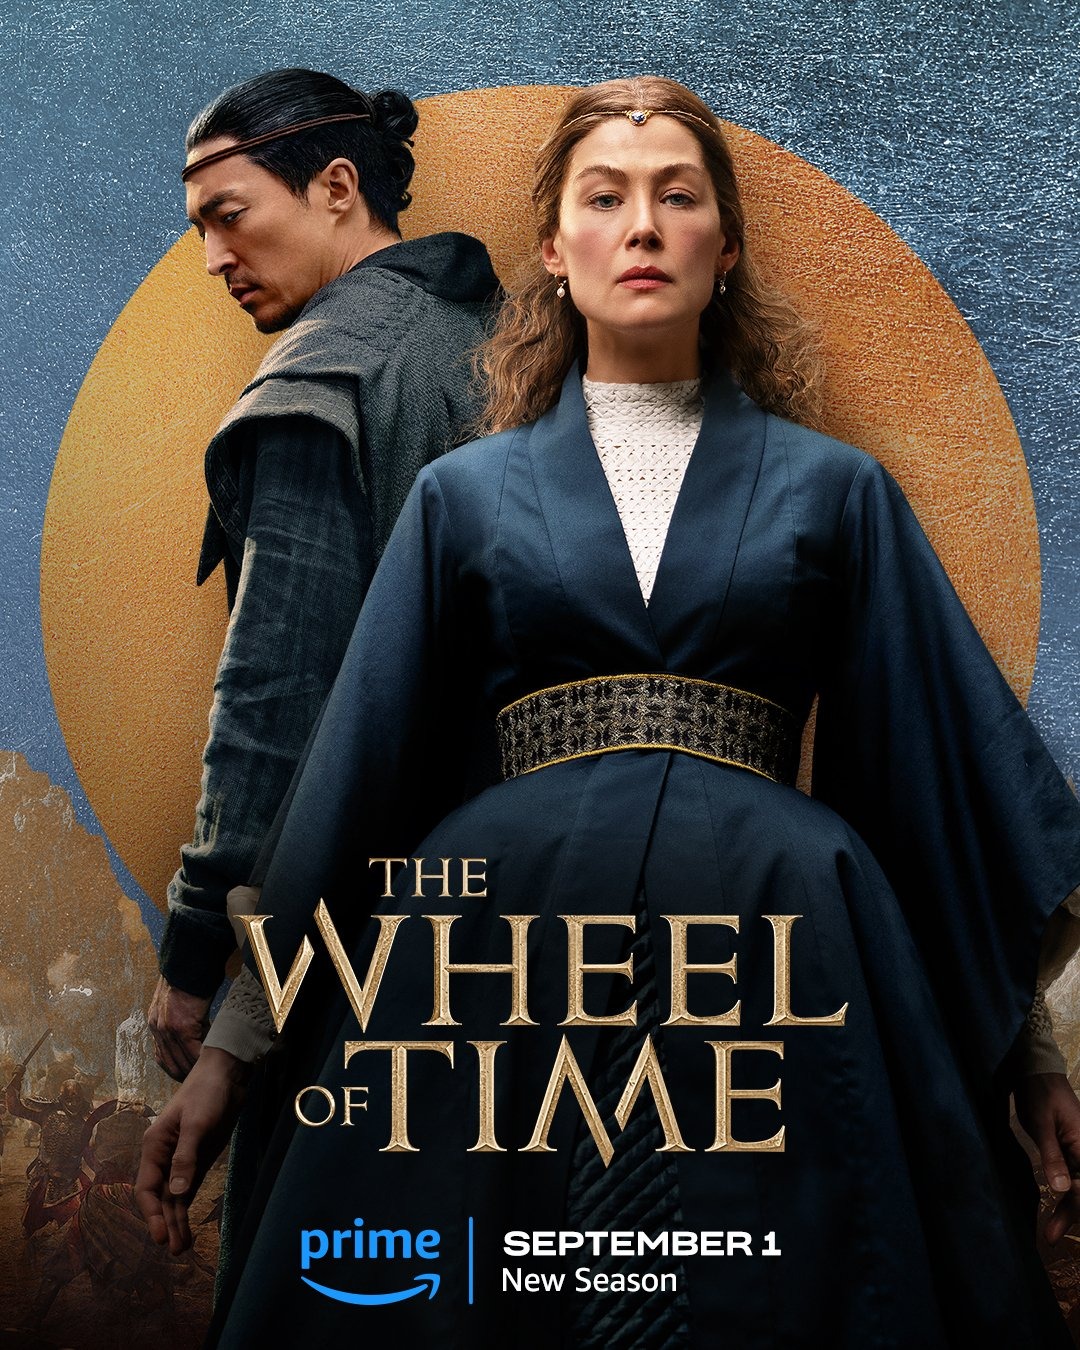 Extra Large TV Poster Image for The Wheel of Time (#27 of 33)